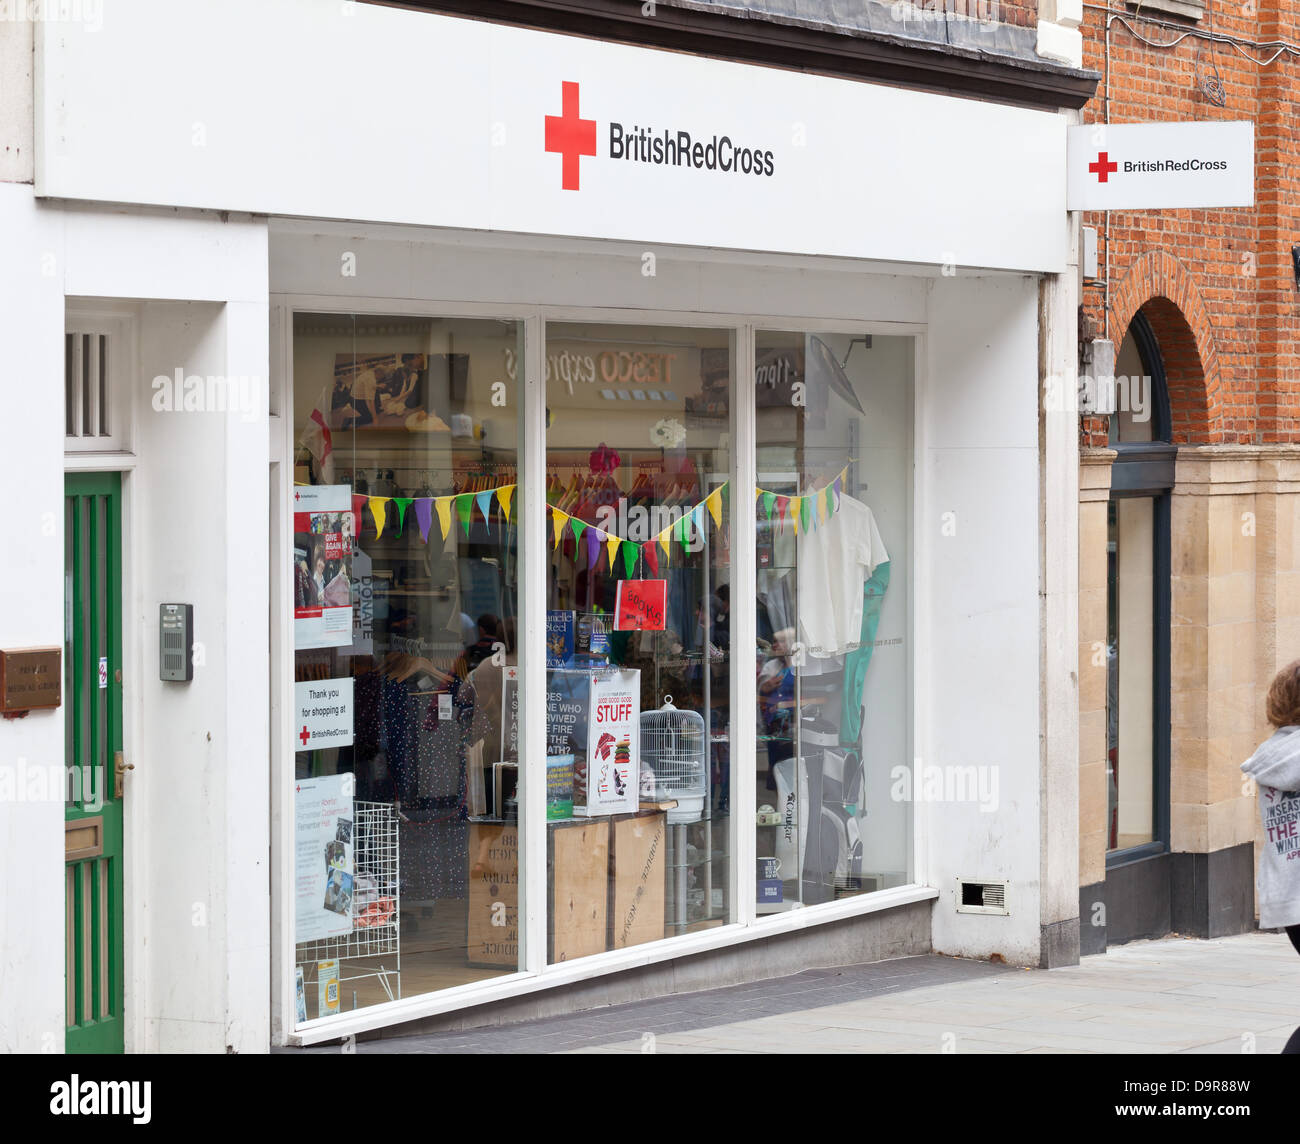 Lincoln - British Red Cross Shop à High Street, Lincoln, Lincolnshire, Royaume-Uni, Europe Banque D'Images